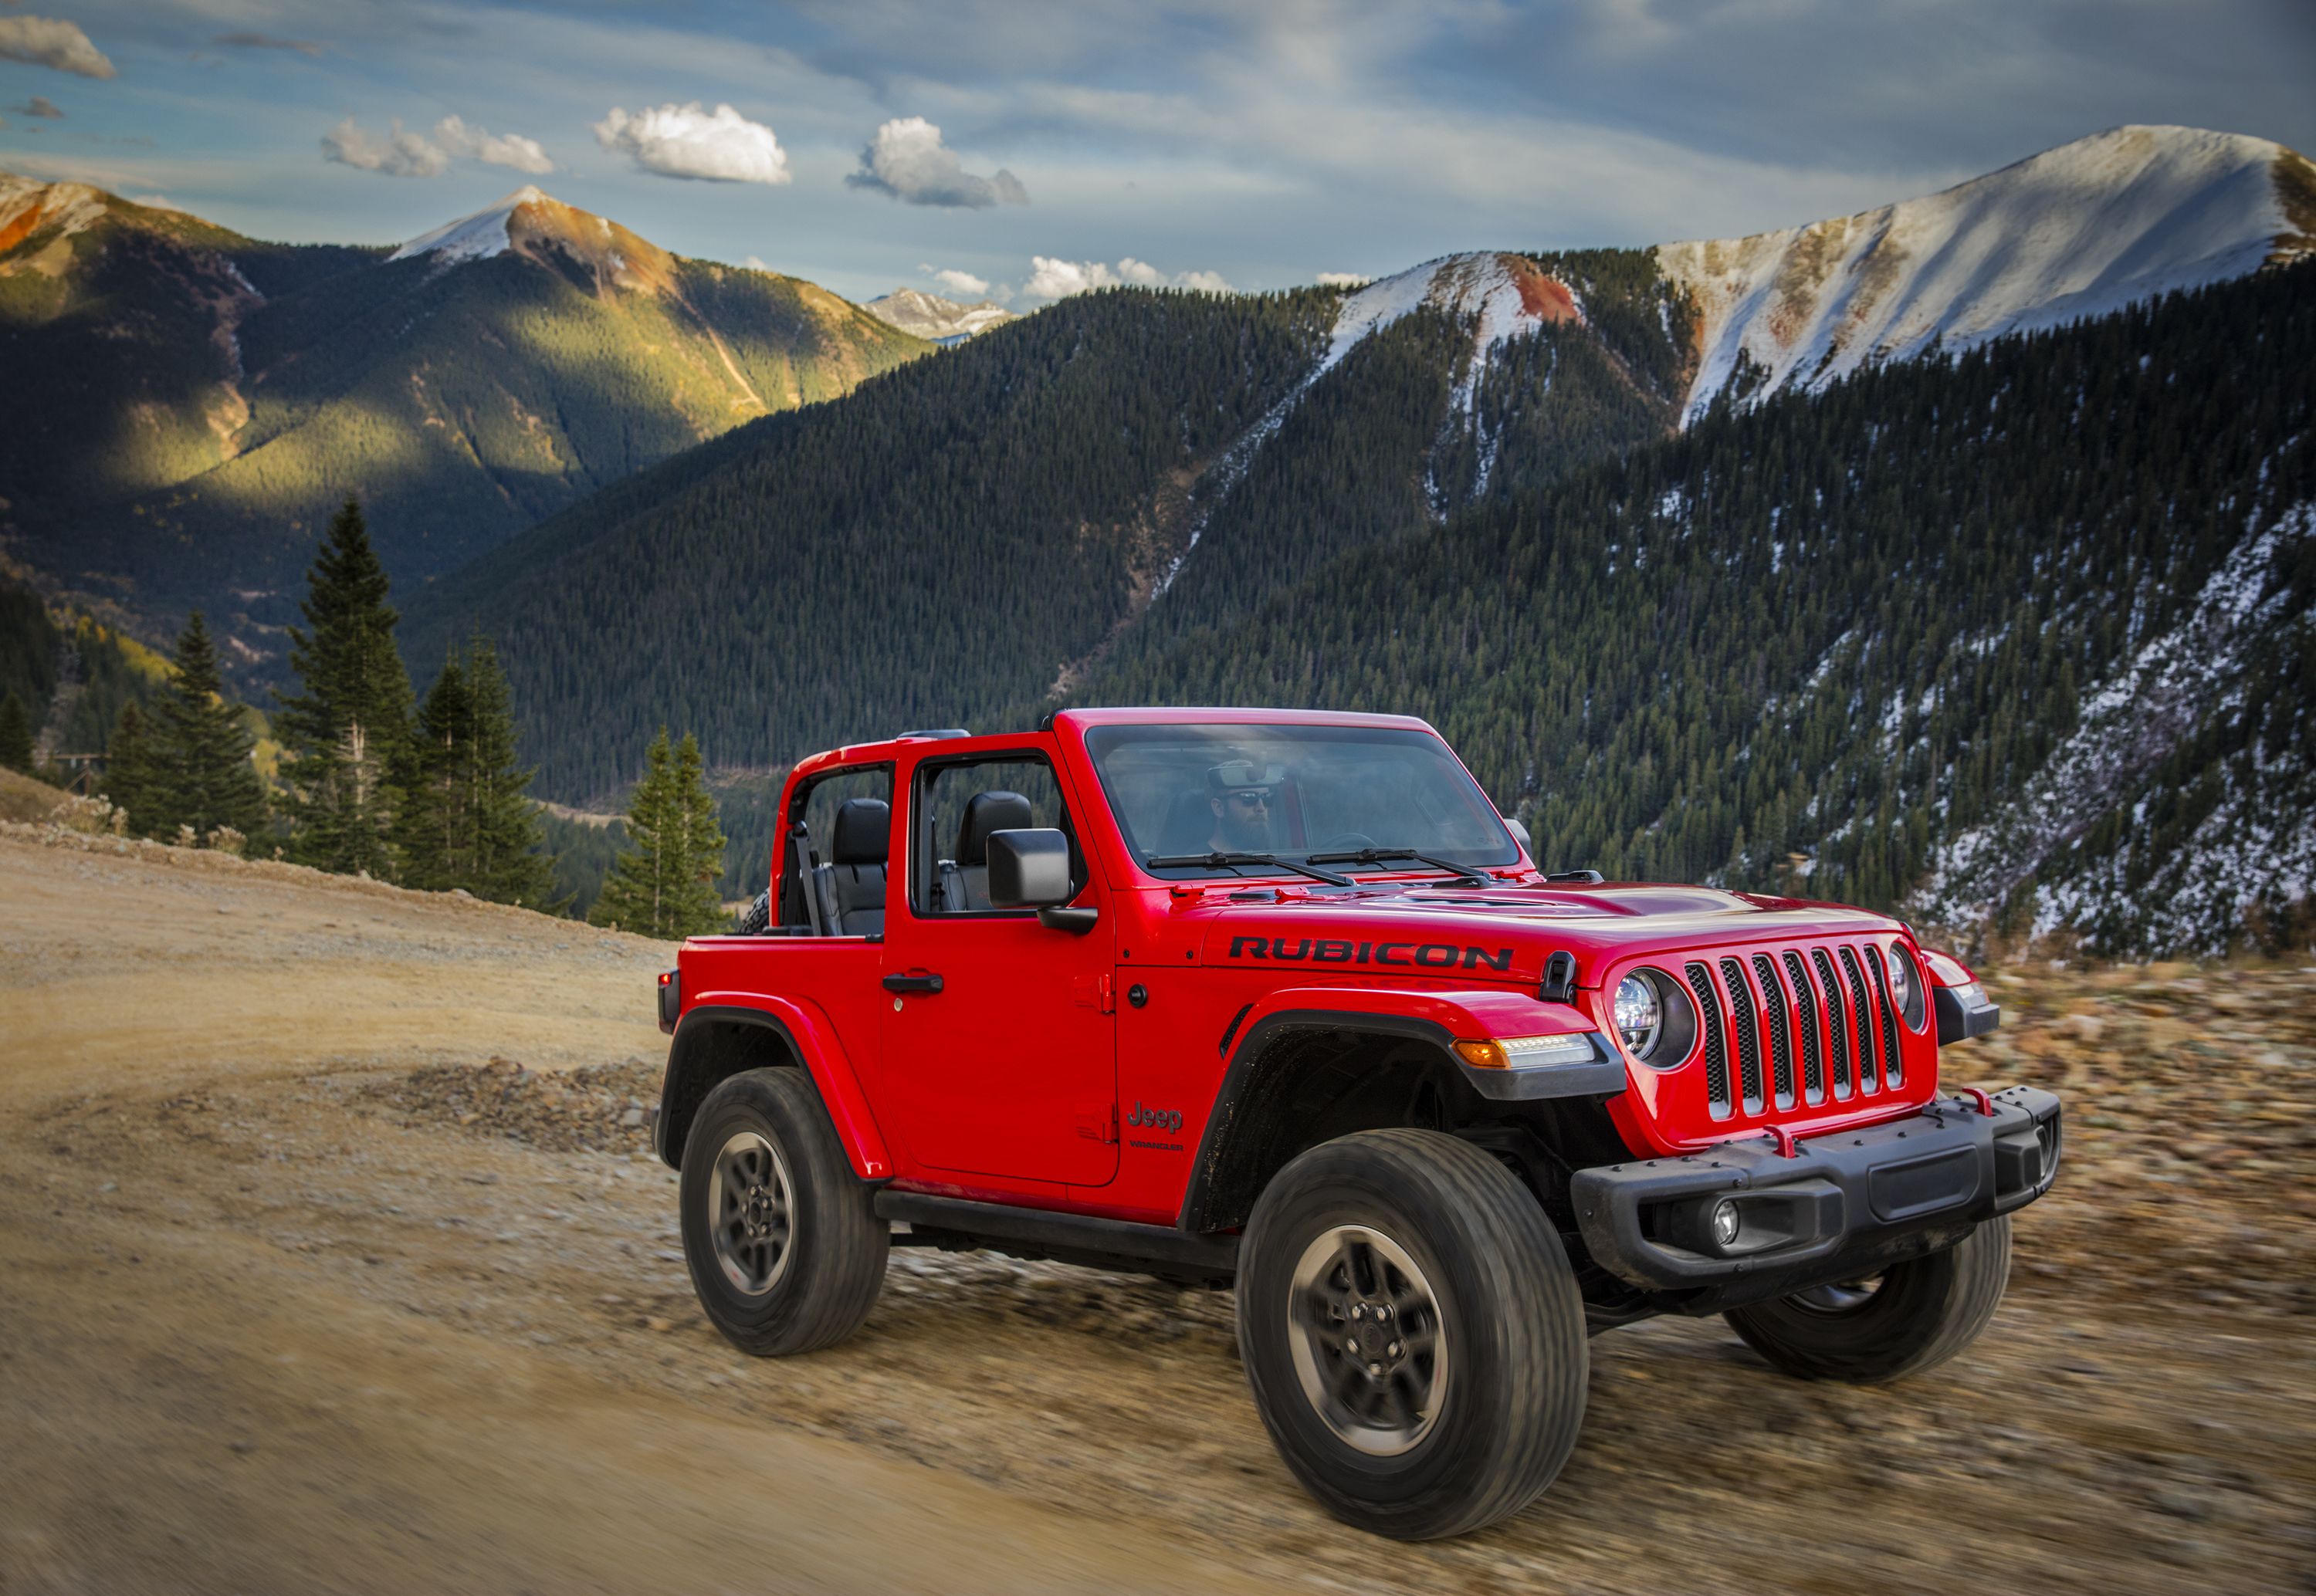 Jeep says its new electric Wrangler SUV concept is as fast as a Tesla